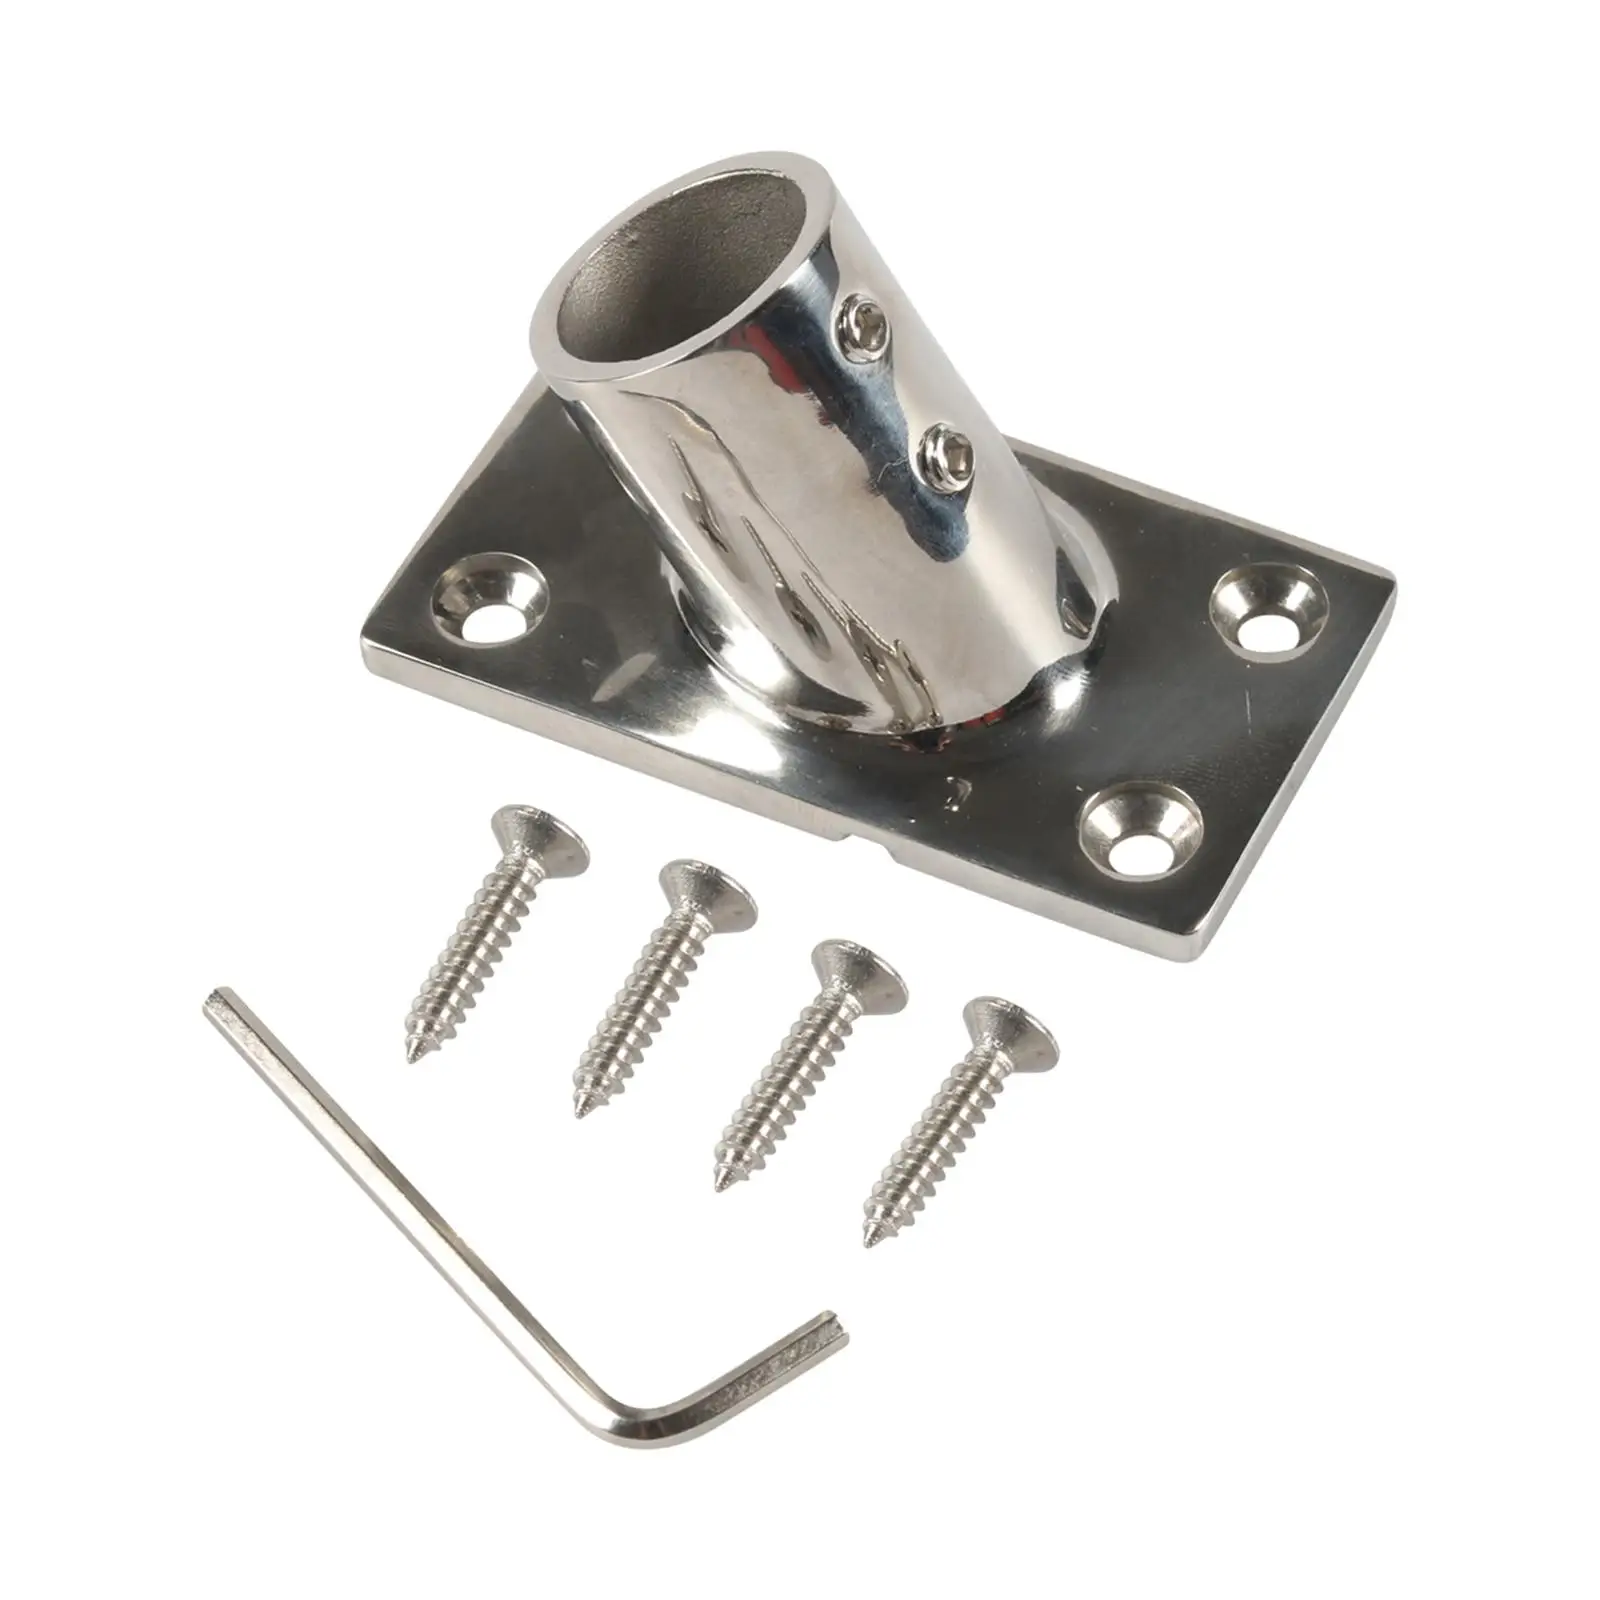 60 Degree Boat Handrail Fitting Stainless Steel Rectangular Base Hardware for Yachts Boat Inflatable Boats Marine Polished